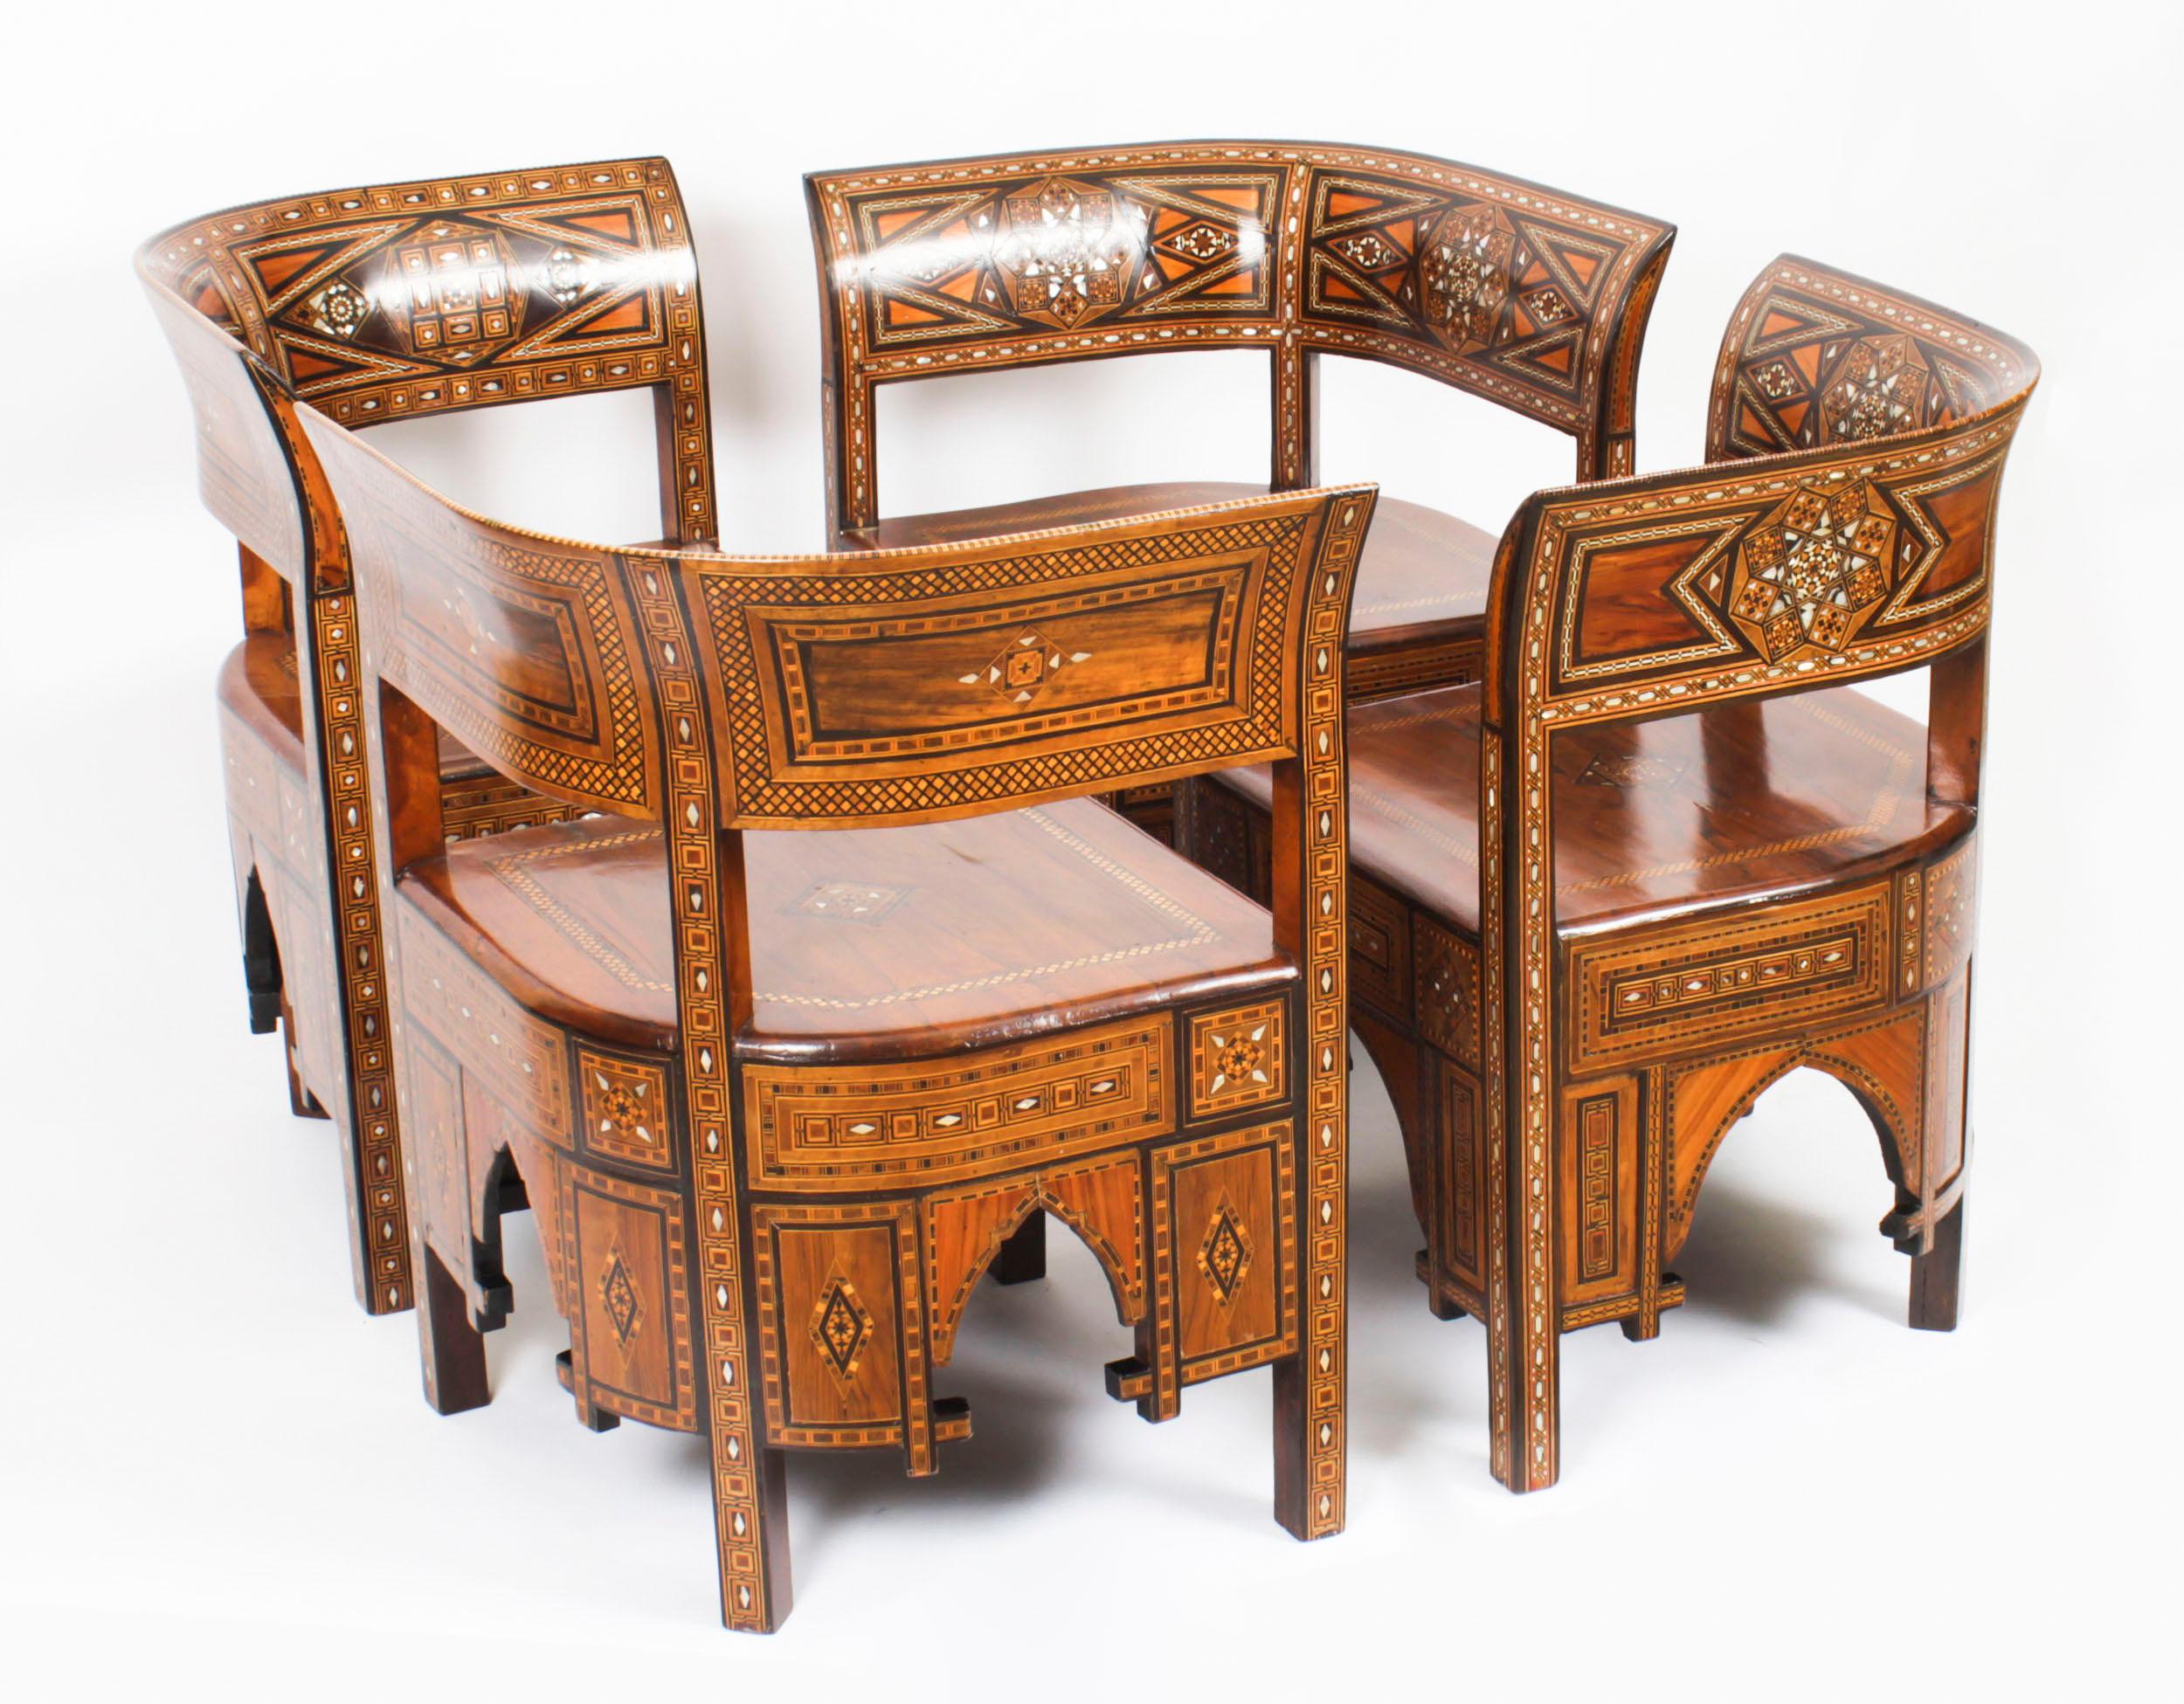 Antique Set of 4 Syrian Parquetry Inlaid Armchairs, Early 20th Century For Sale 14